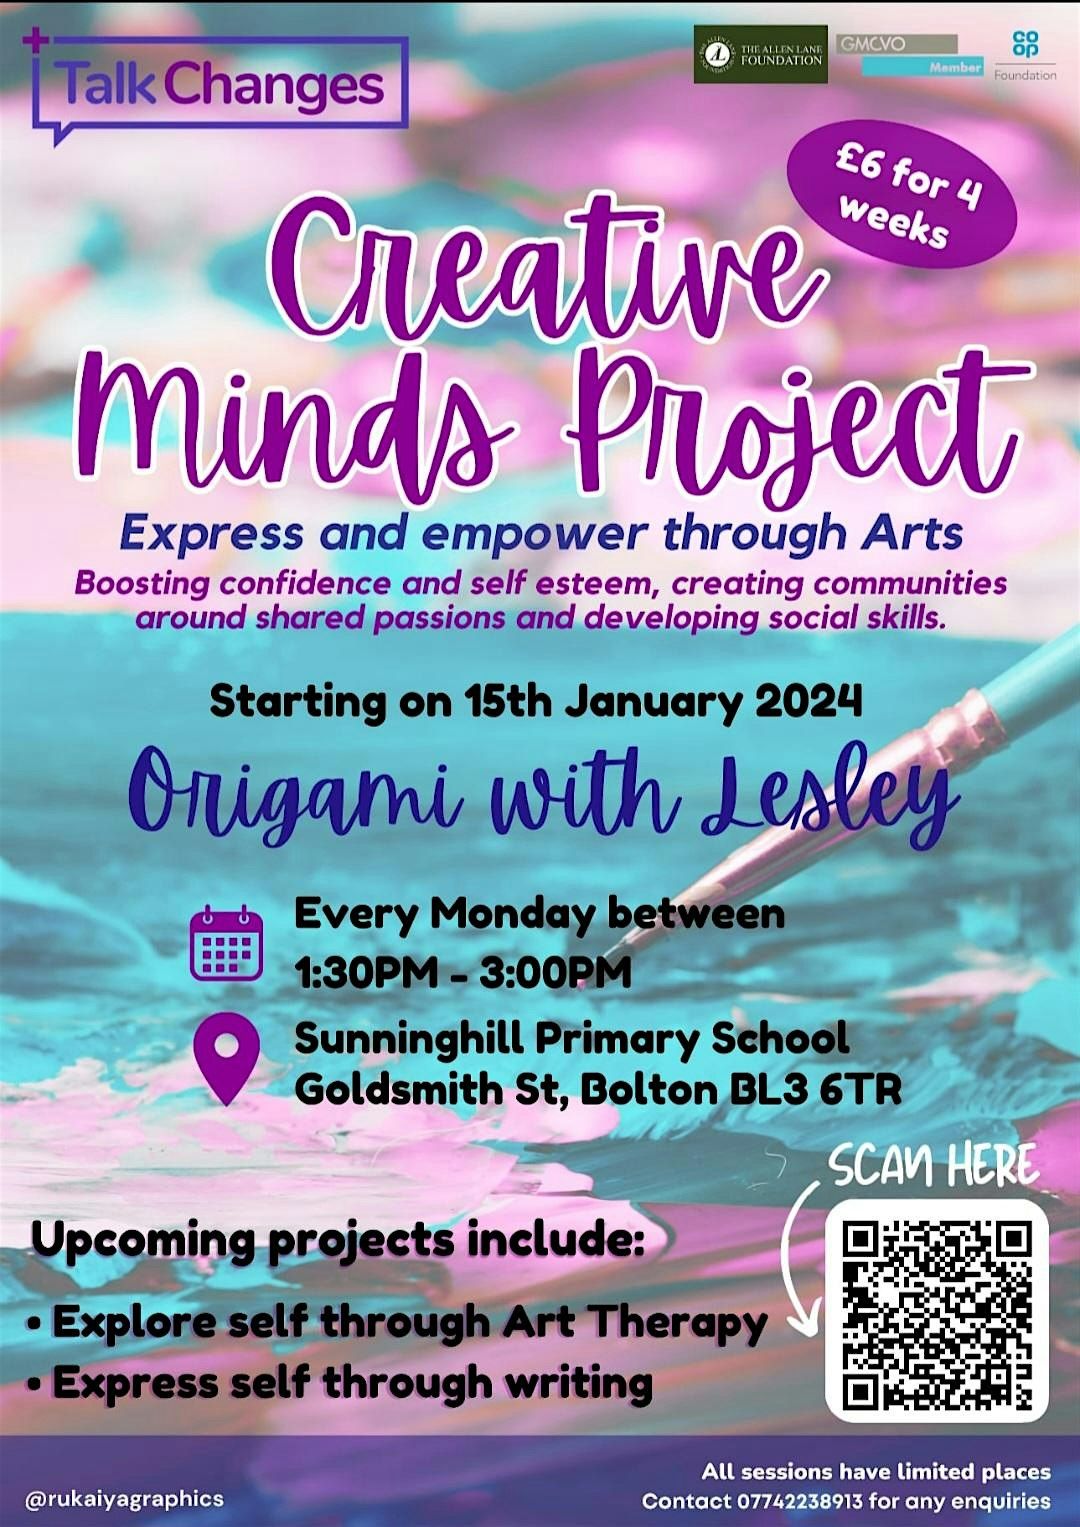 The Creative Minds Project